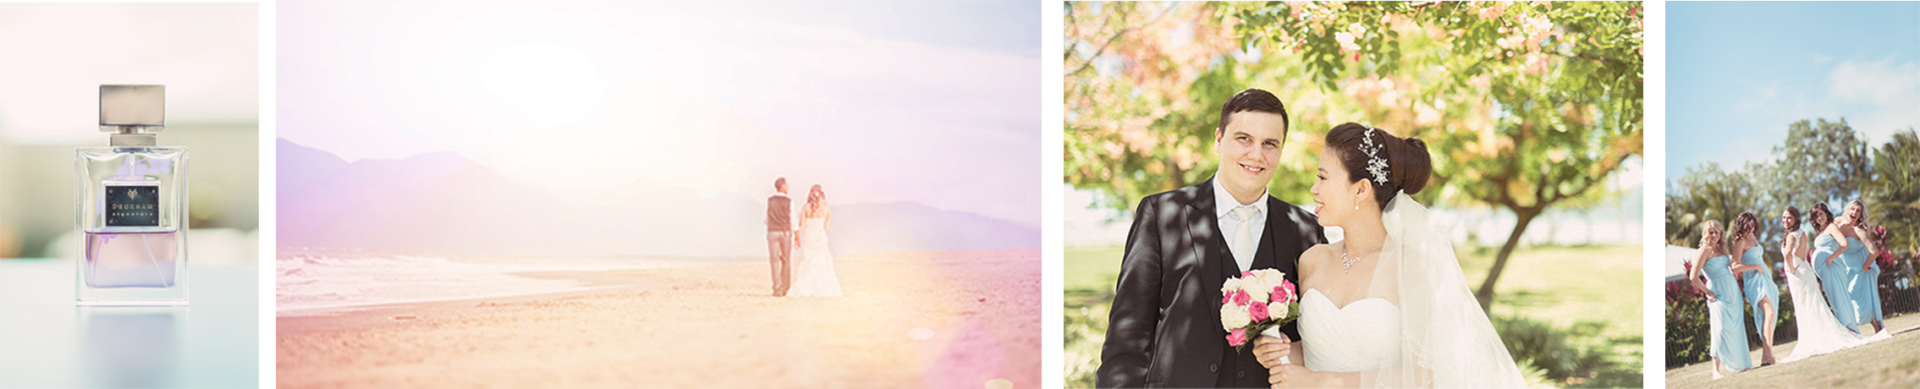 Portfolio image of different weddings in Cairns and Port Douglas